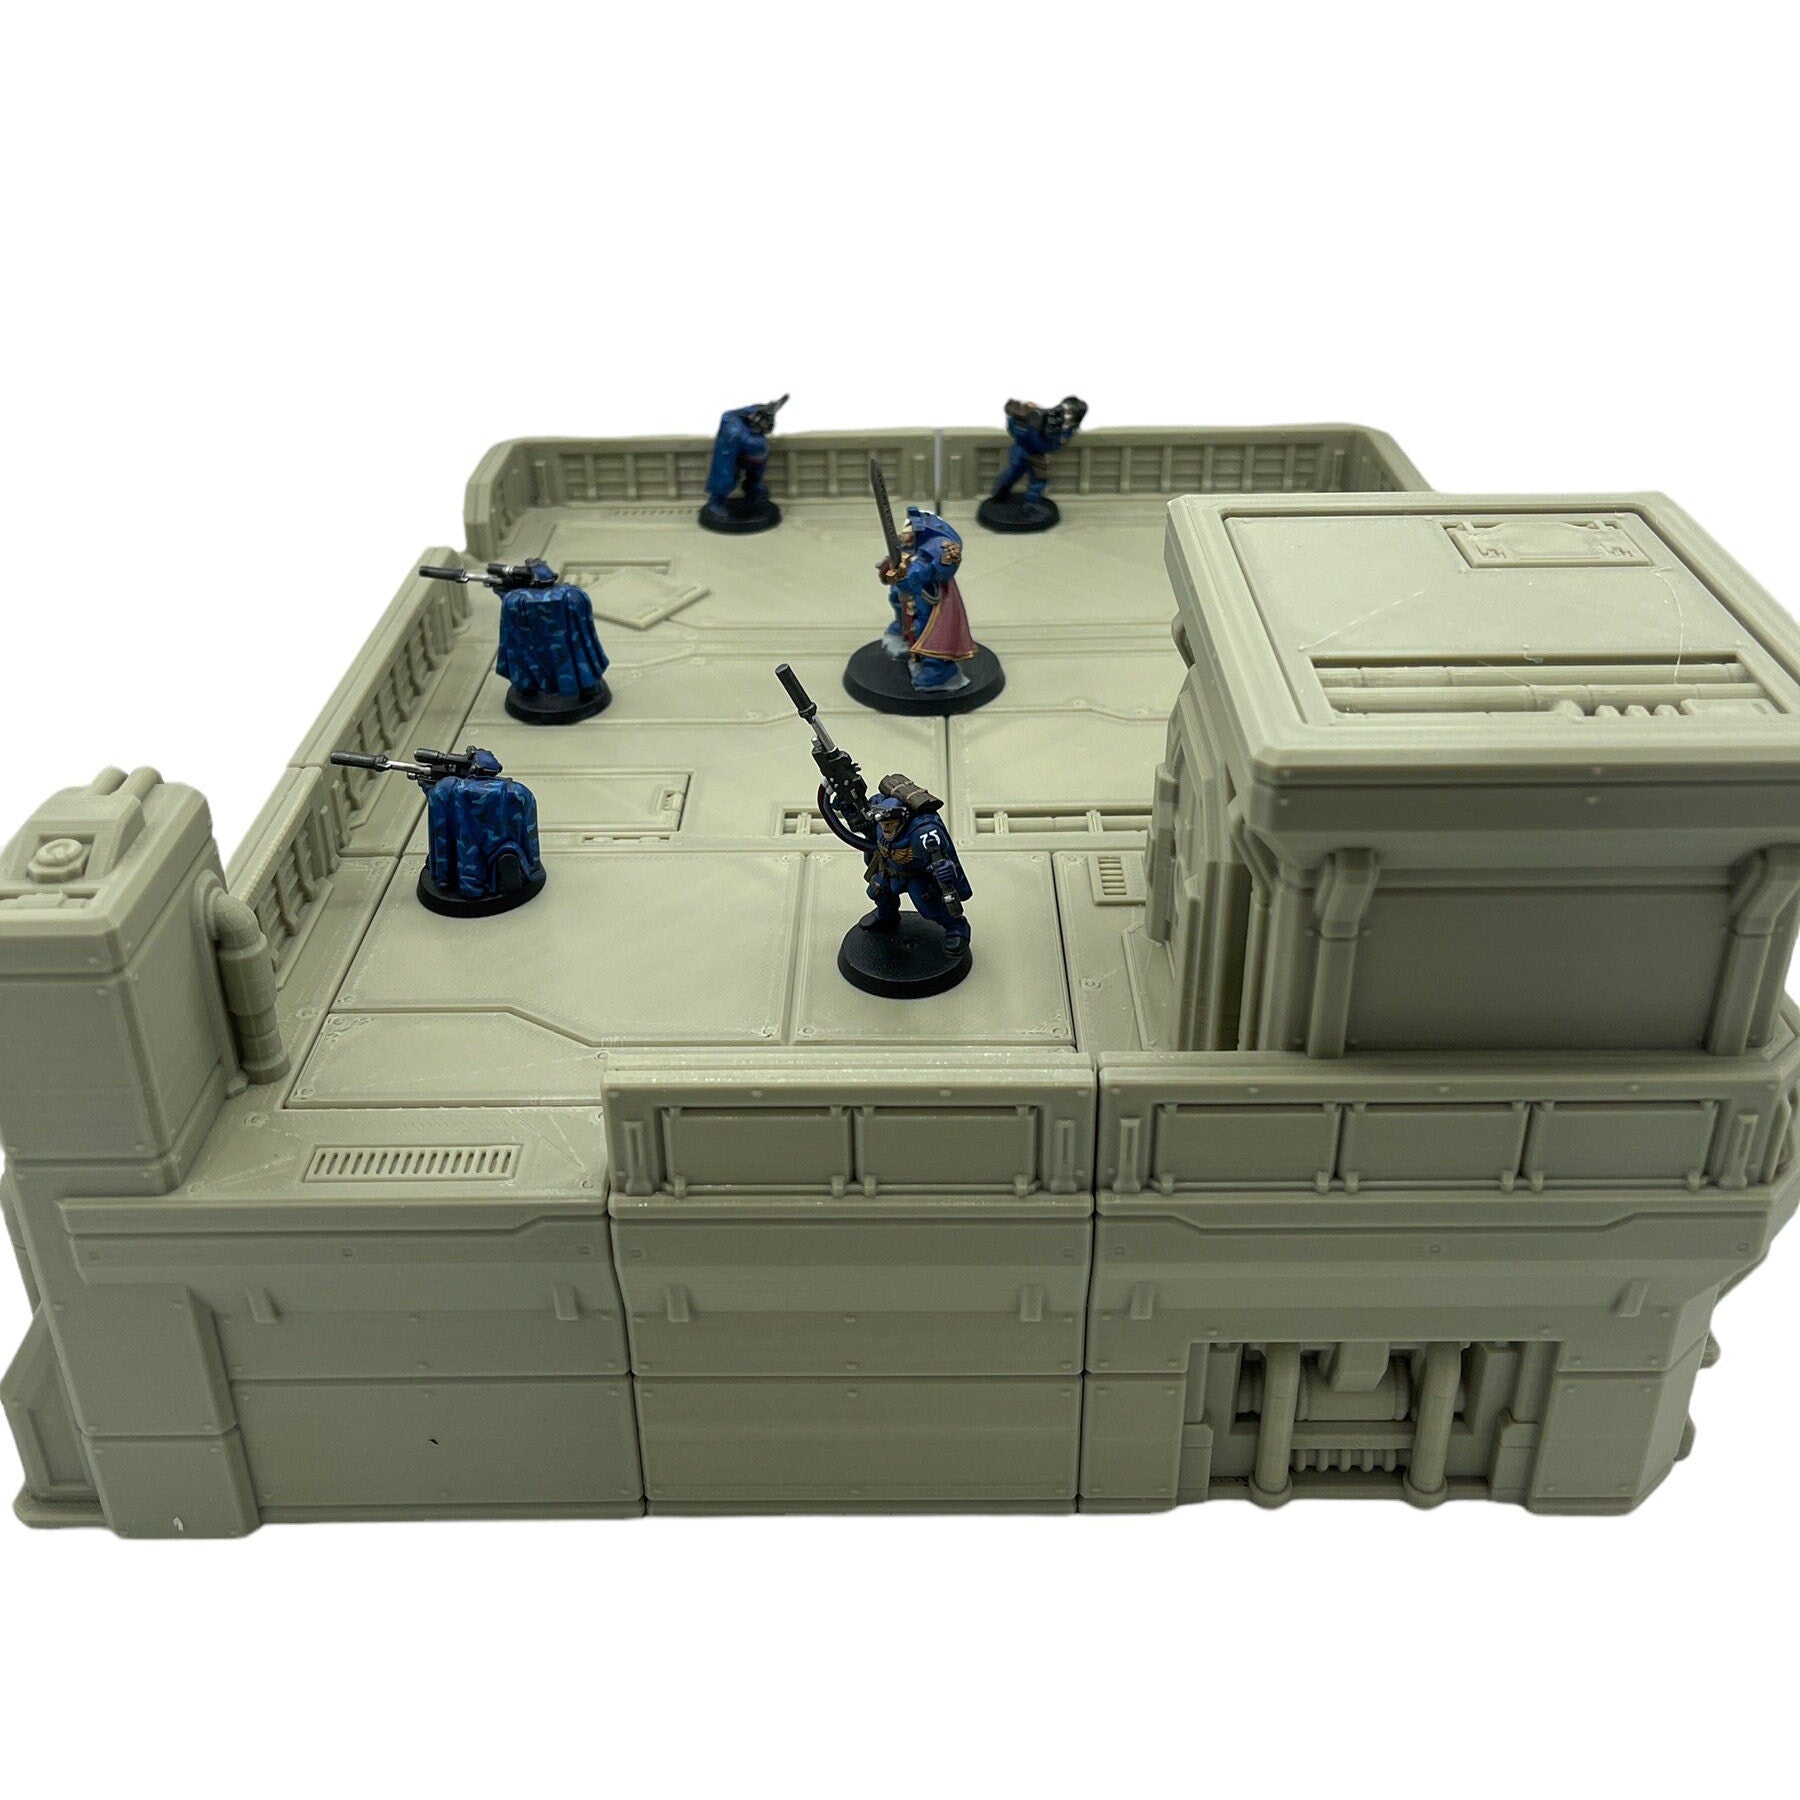 Outpost 21 - Command Post / Forbidden Prints / 3d Printed Tabletop Terrain / Licensed Printer